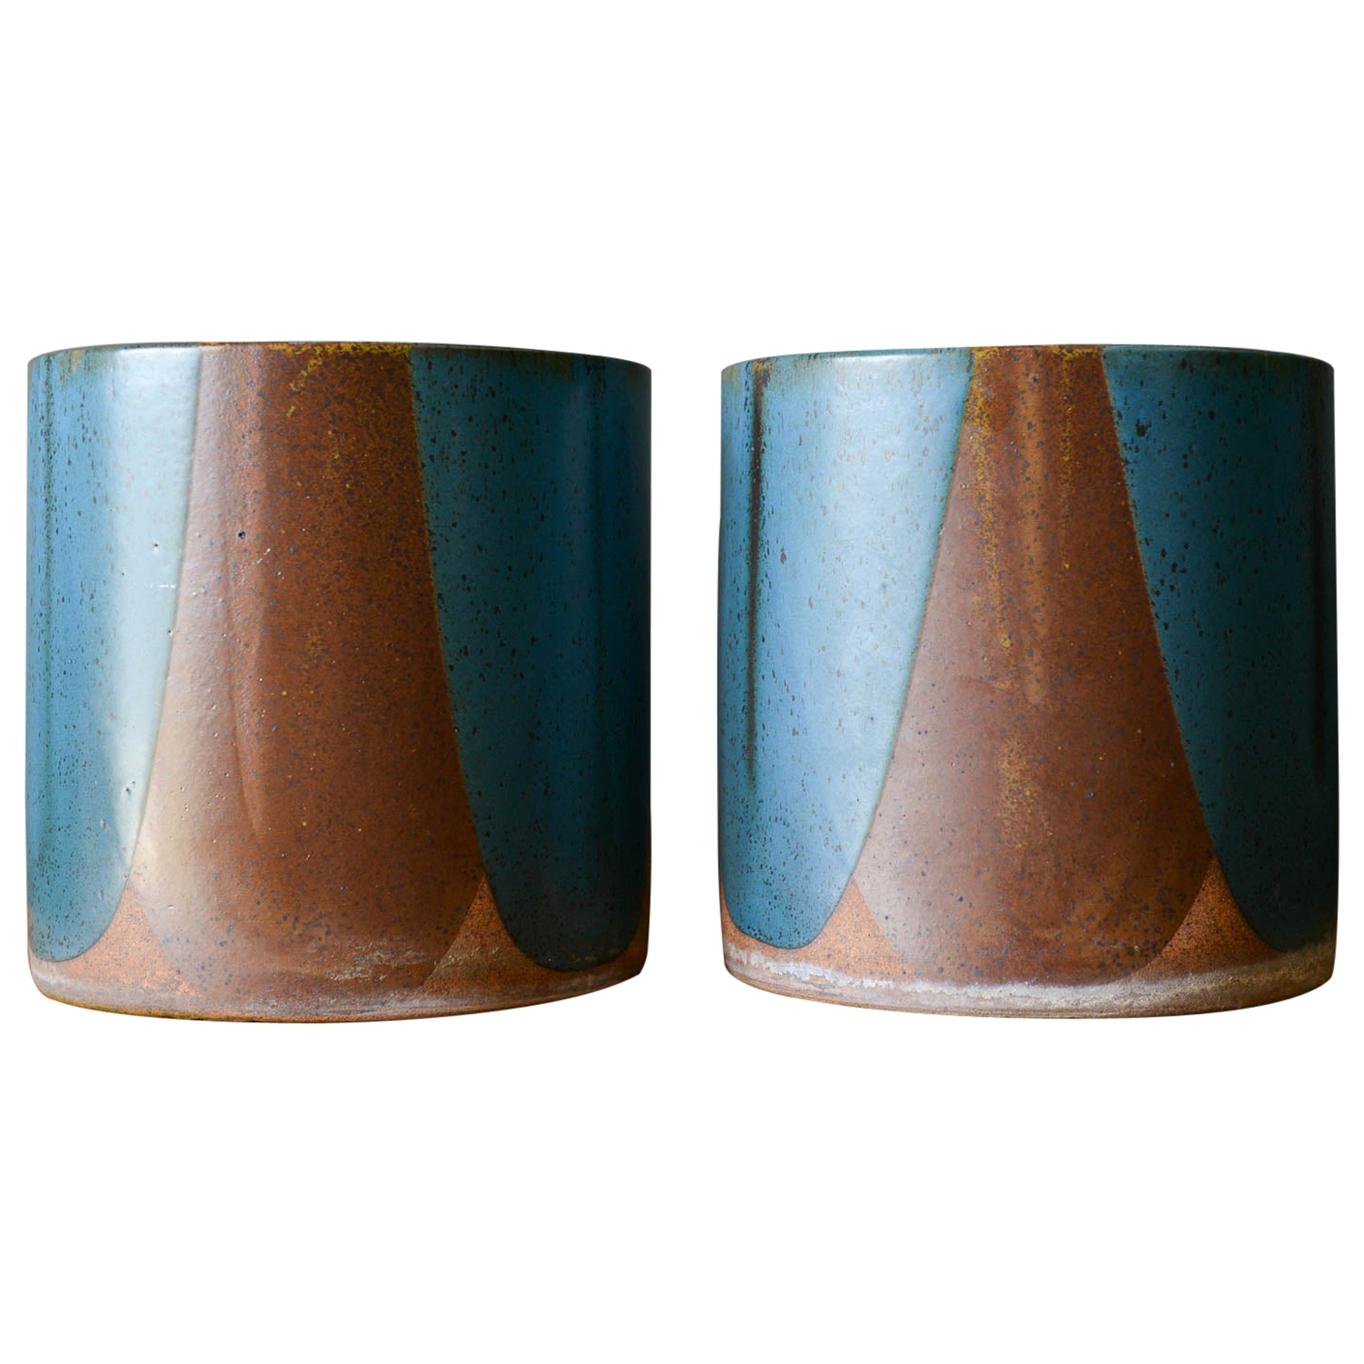 David Cressey for Architectural Pottery Pro/Artisan Blue Flame Glaze Planters